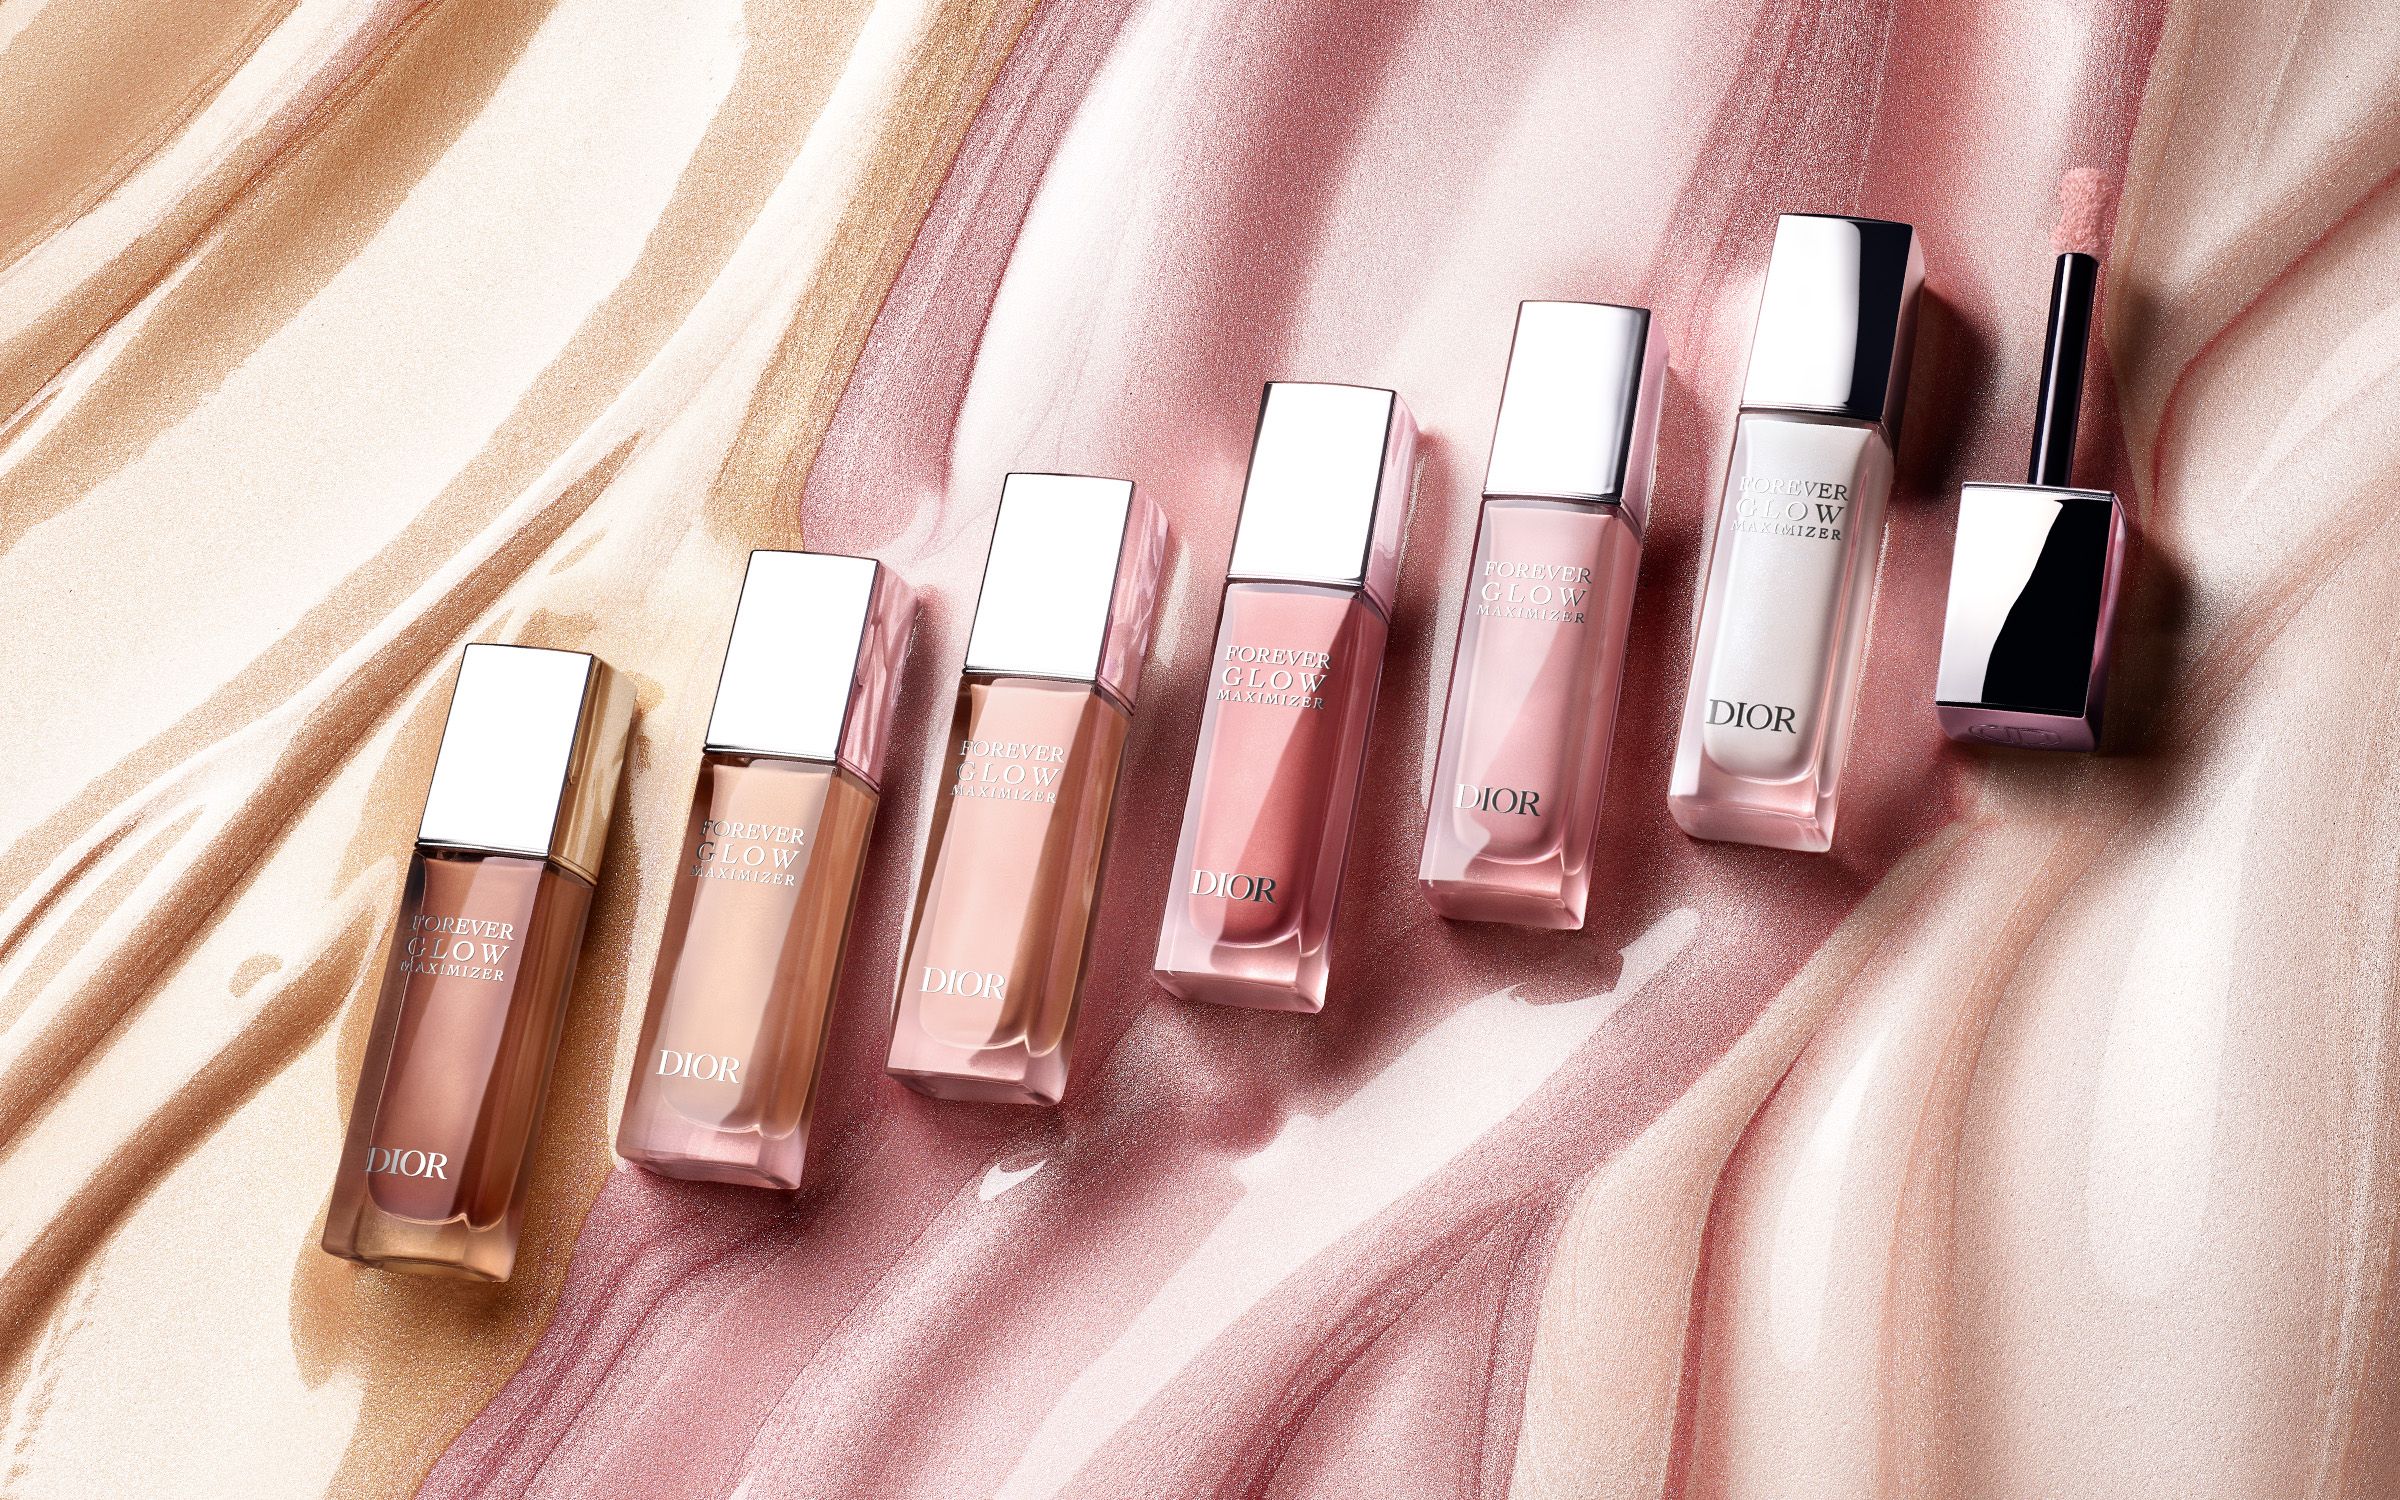 Image of the collection of DIOR Forever Glow Maximiser